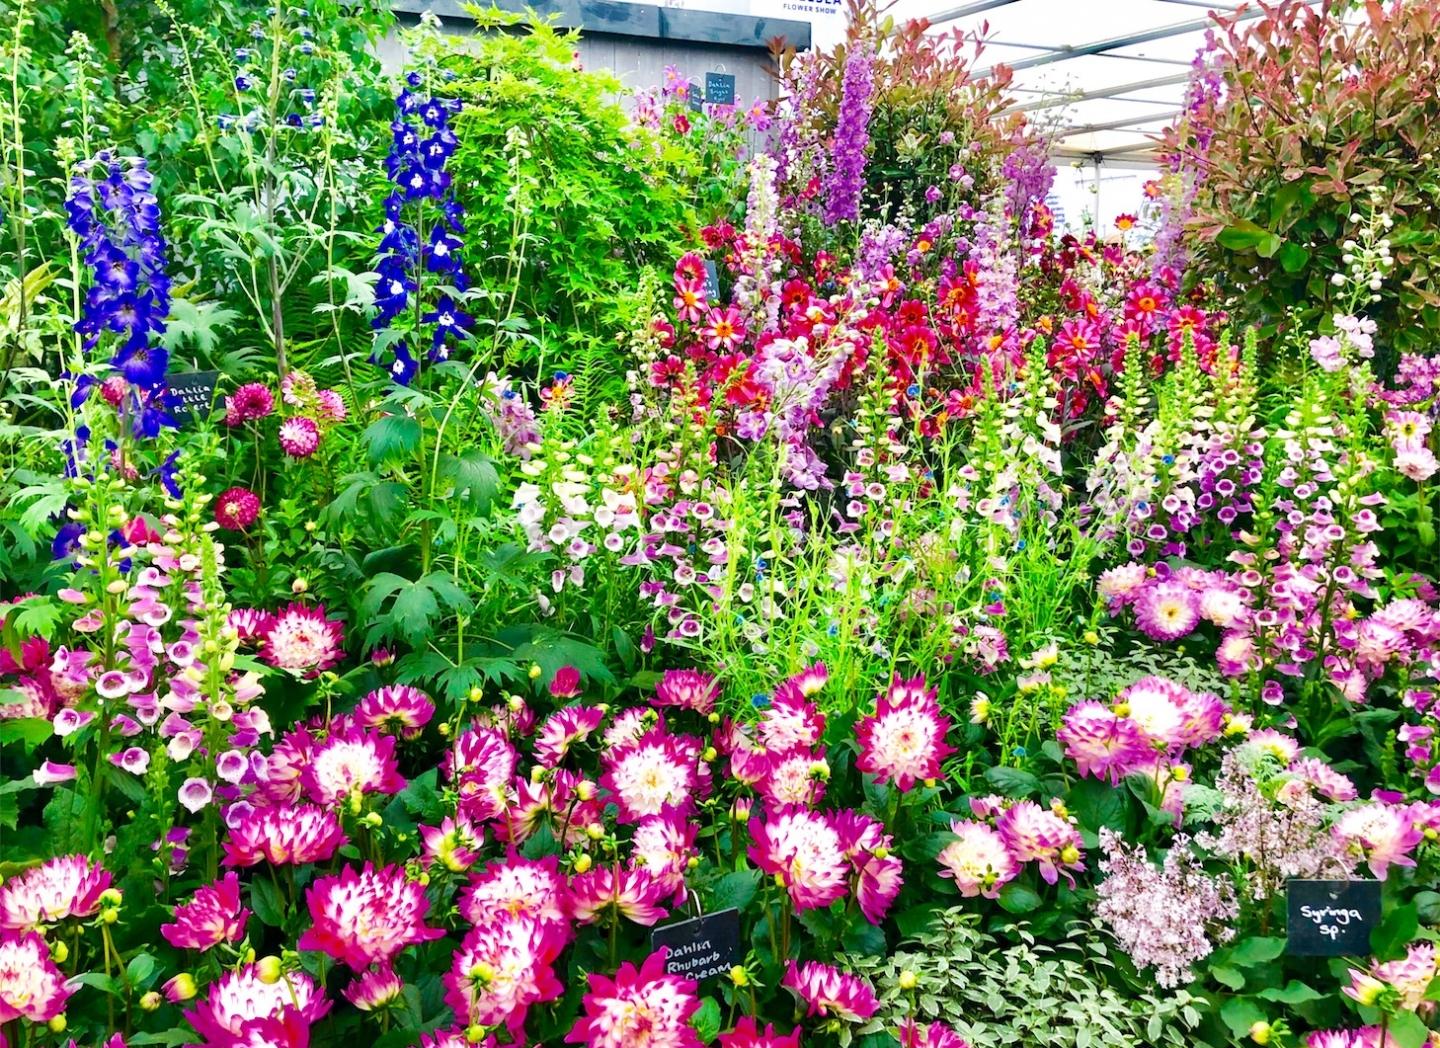 Full blooms at the Chelsea Flower Show